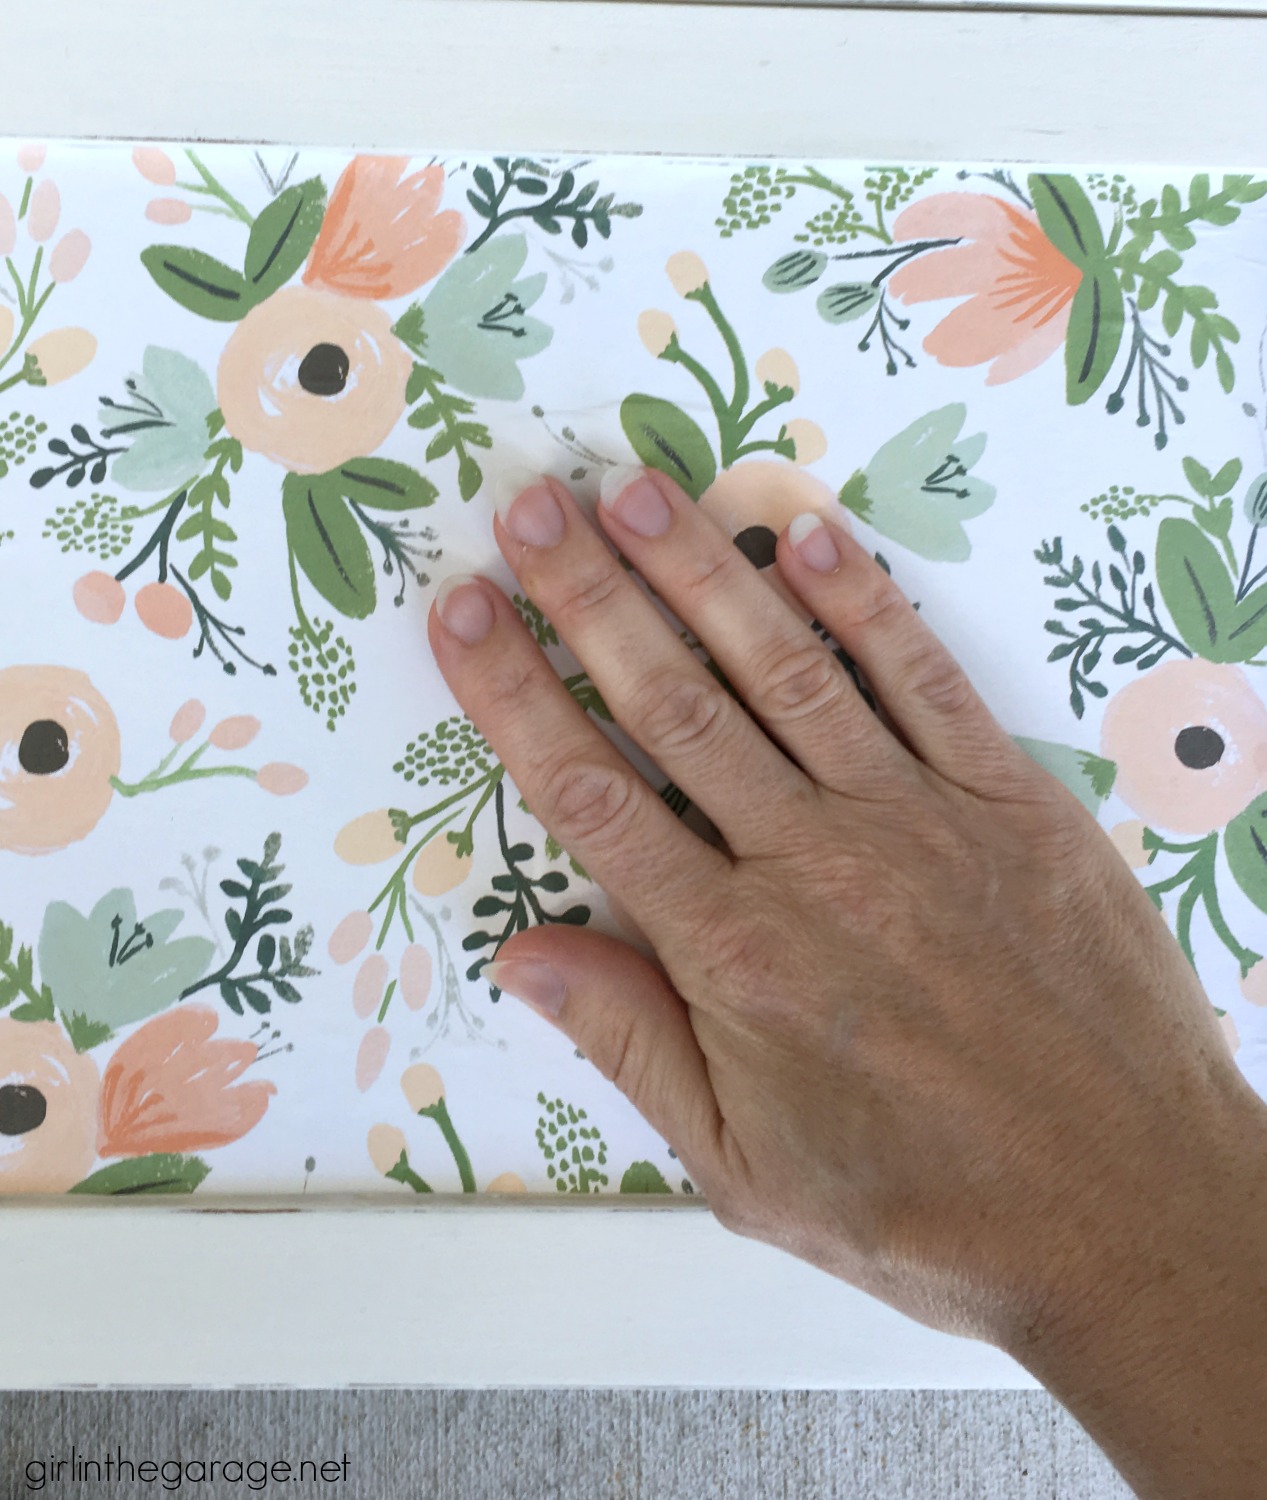 Yard sale cabinet gets a pretty papered cabinet makeover with decoupage Rifle Paper Co wrapping paper and Chalk Paint. DIY Tutorial by Girl in the Garage